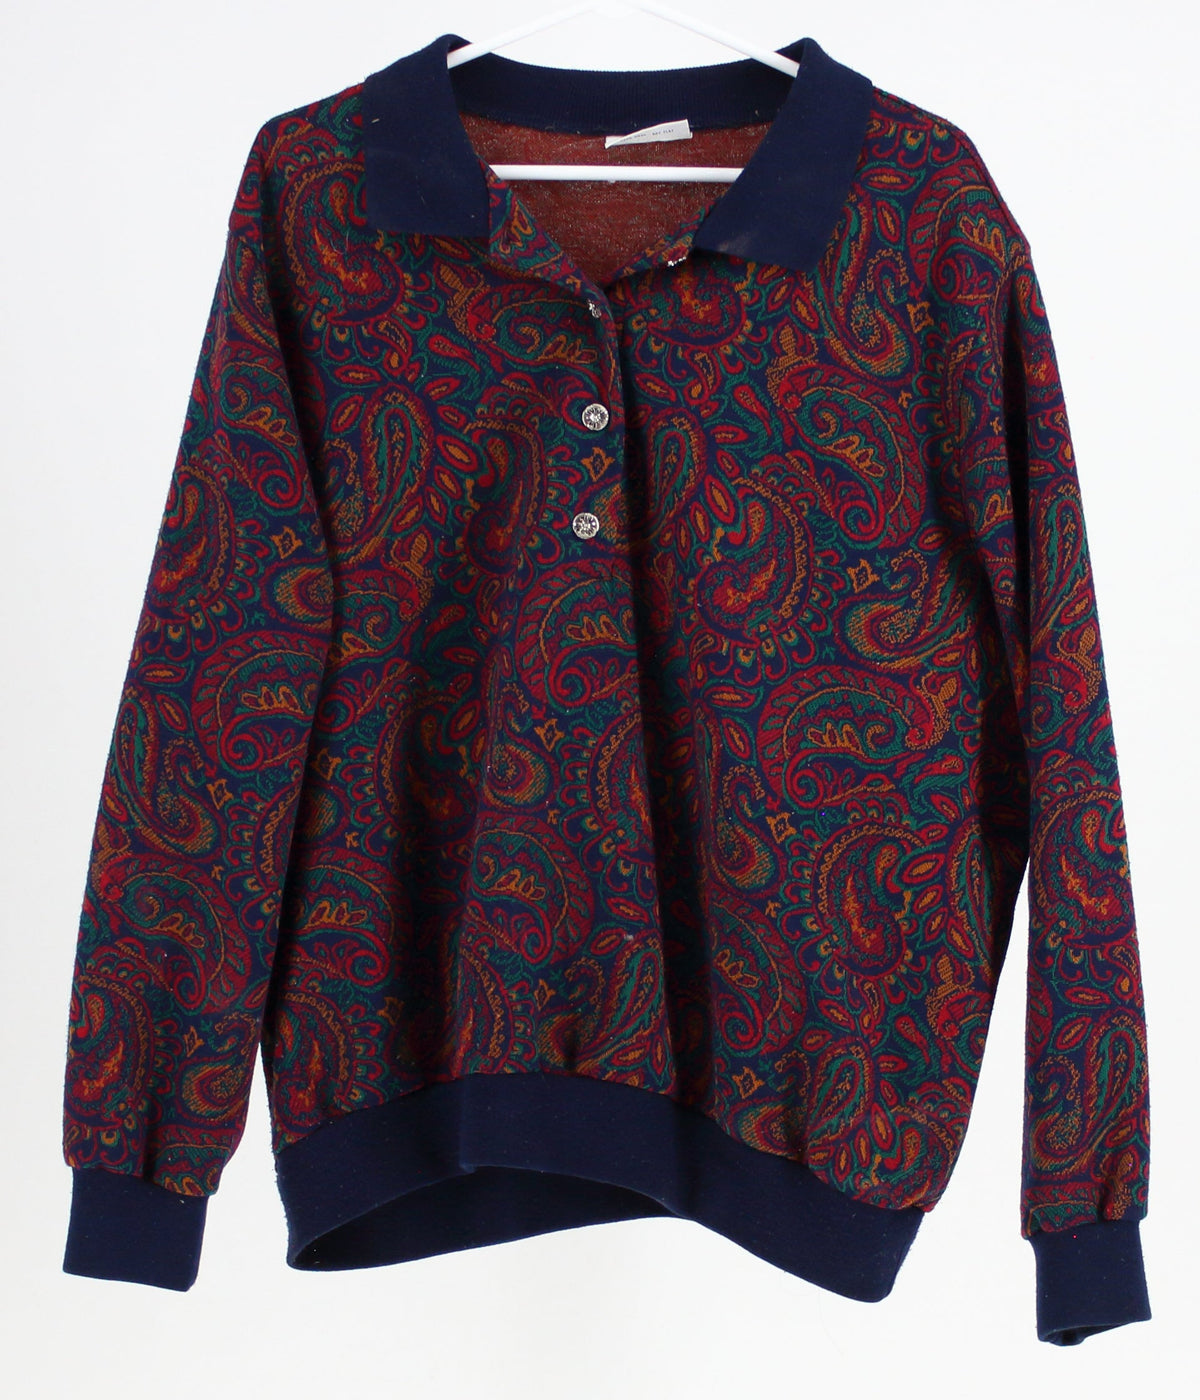 Alred Dunner Multi Coloured Paisley Print Zip Up Sweaters